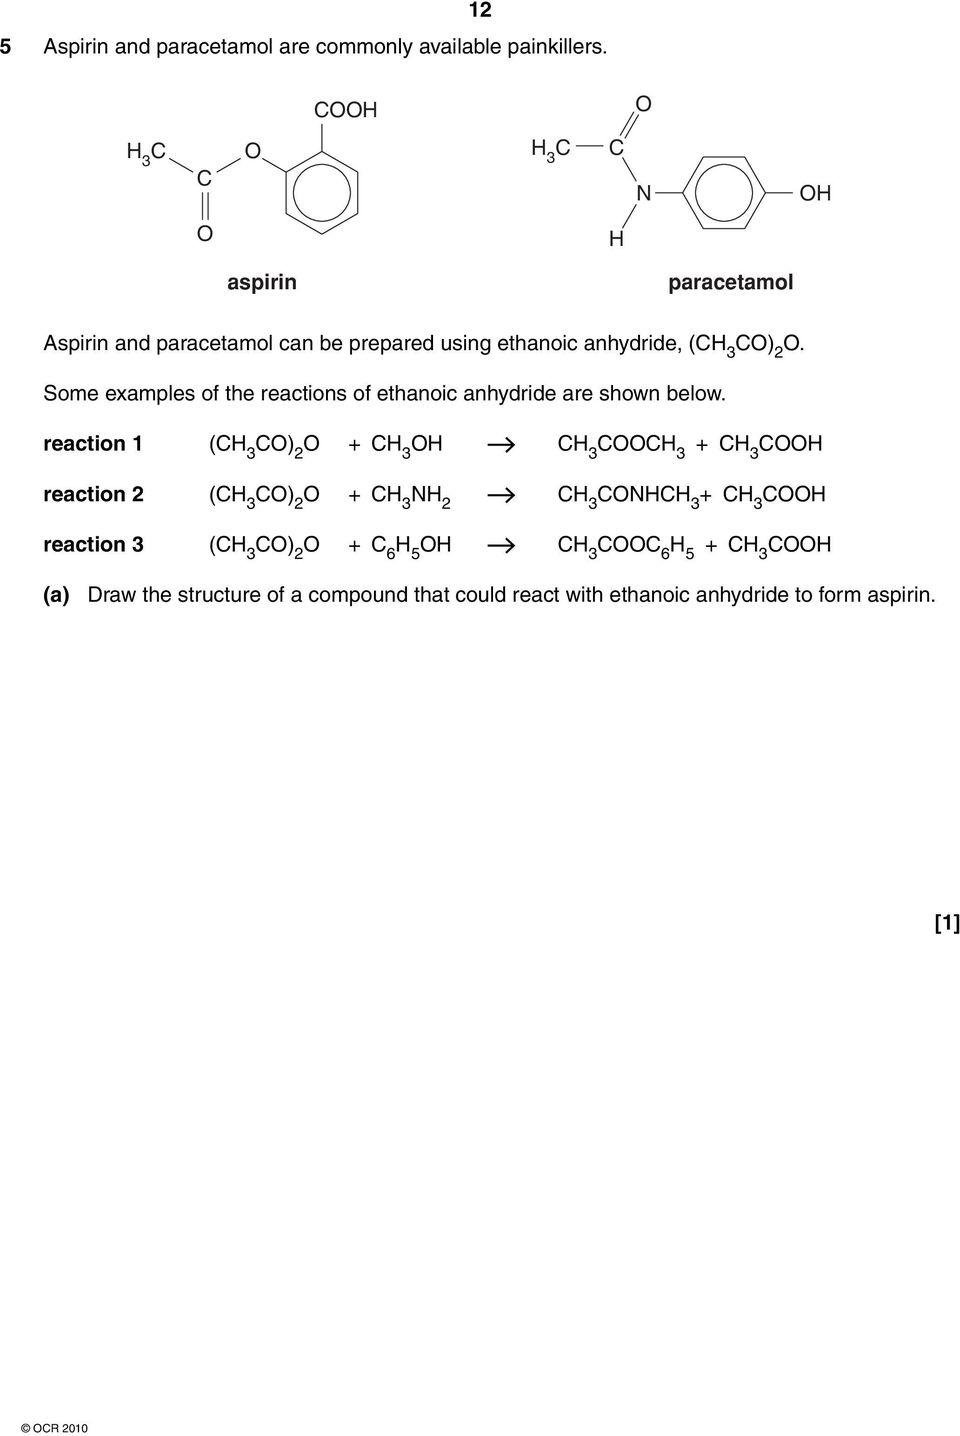 Some examples of the reactions of ethanoic anhydride are shown below.